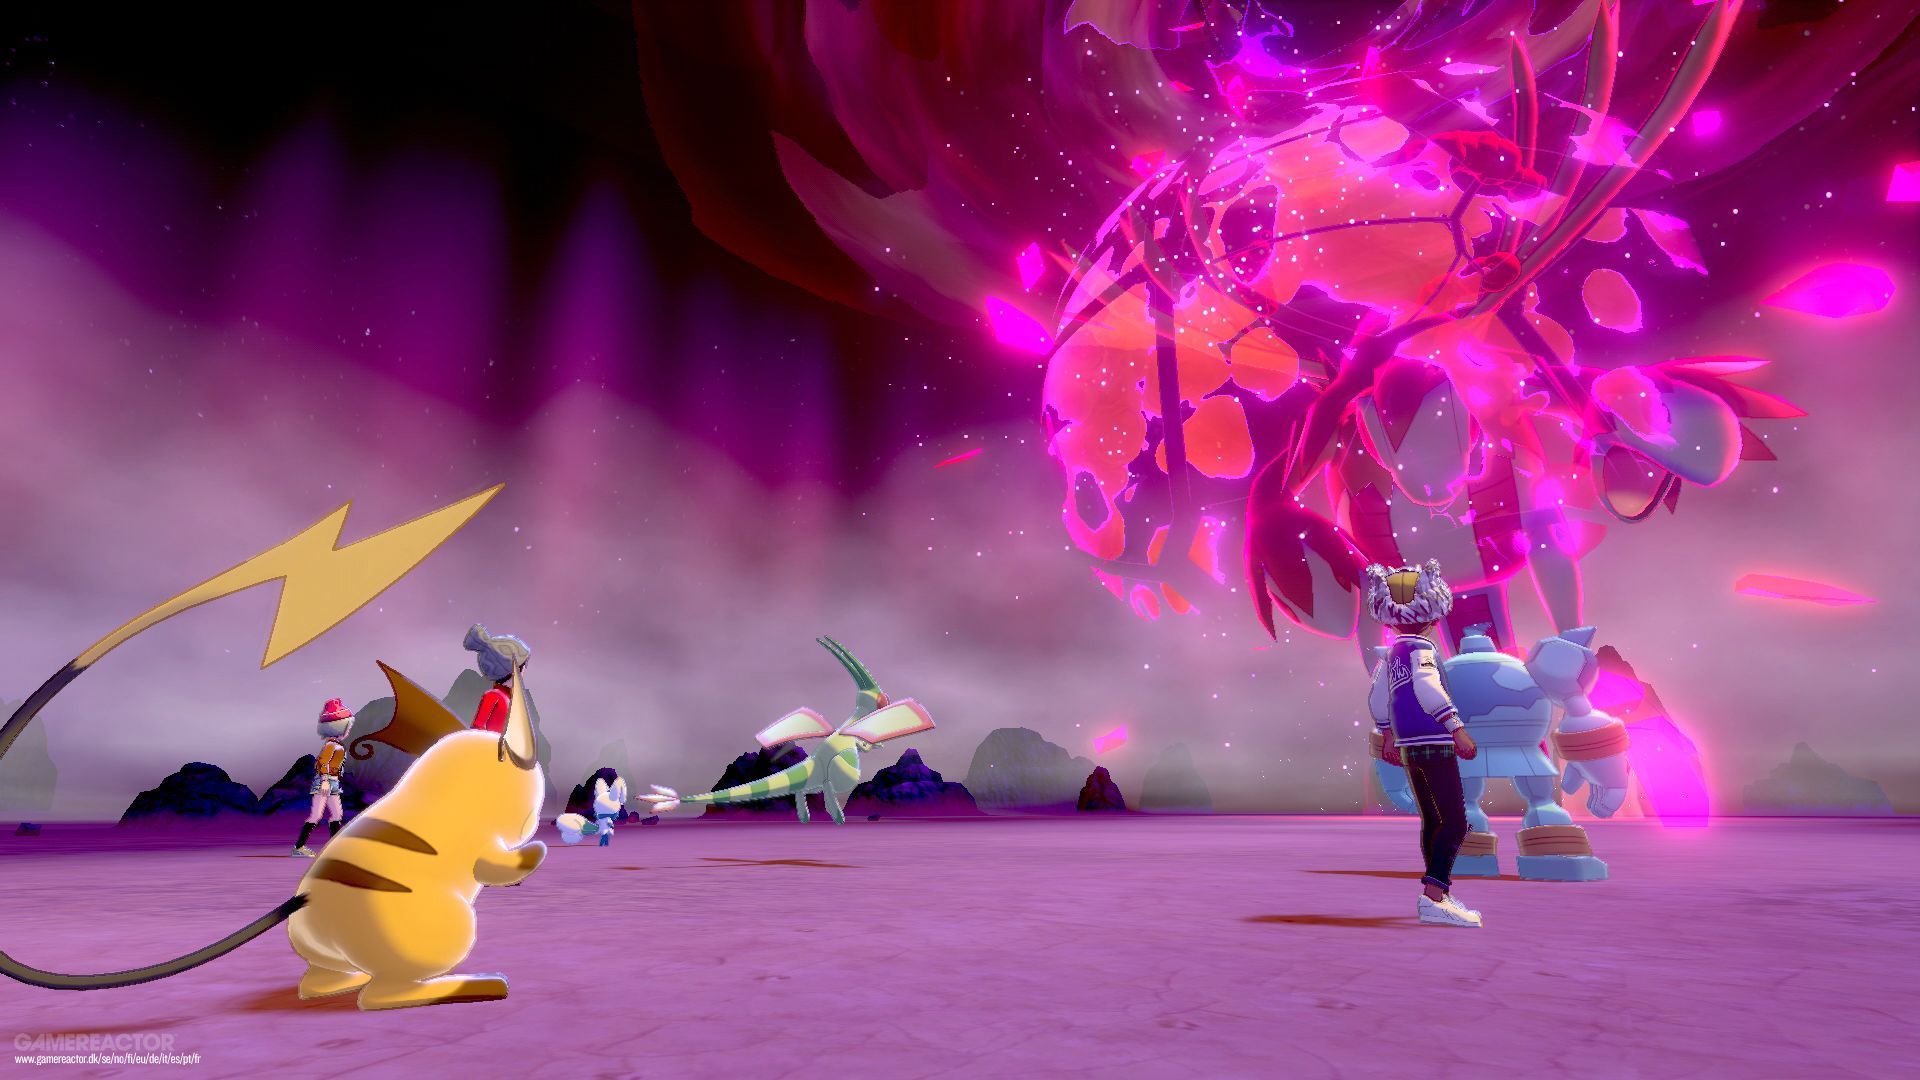 Pokémon Sword and Shield hands-on preview – gigantic fun